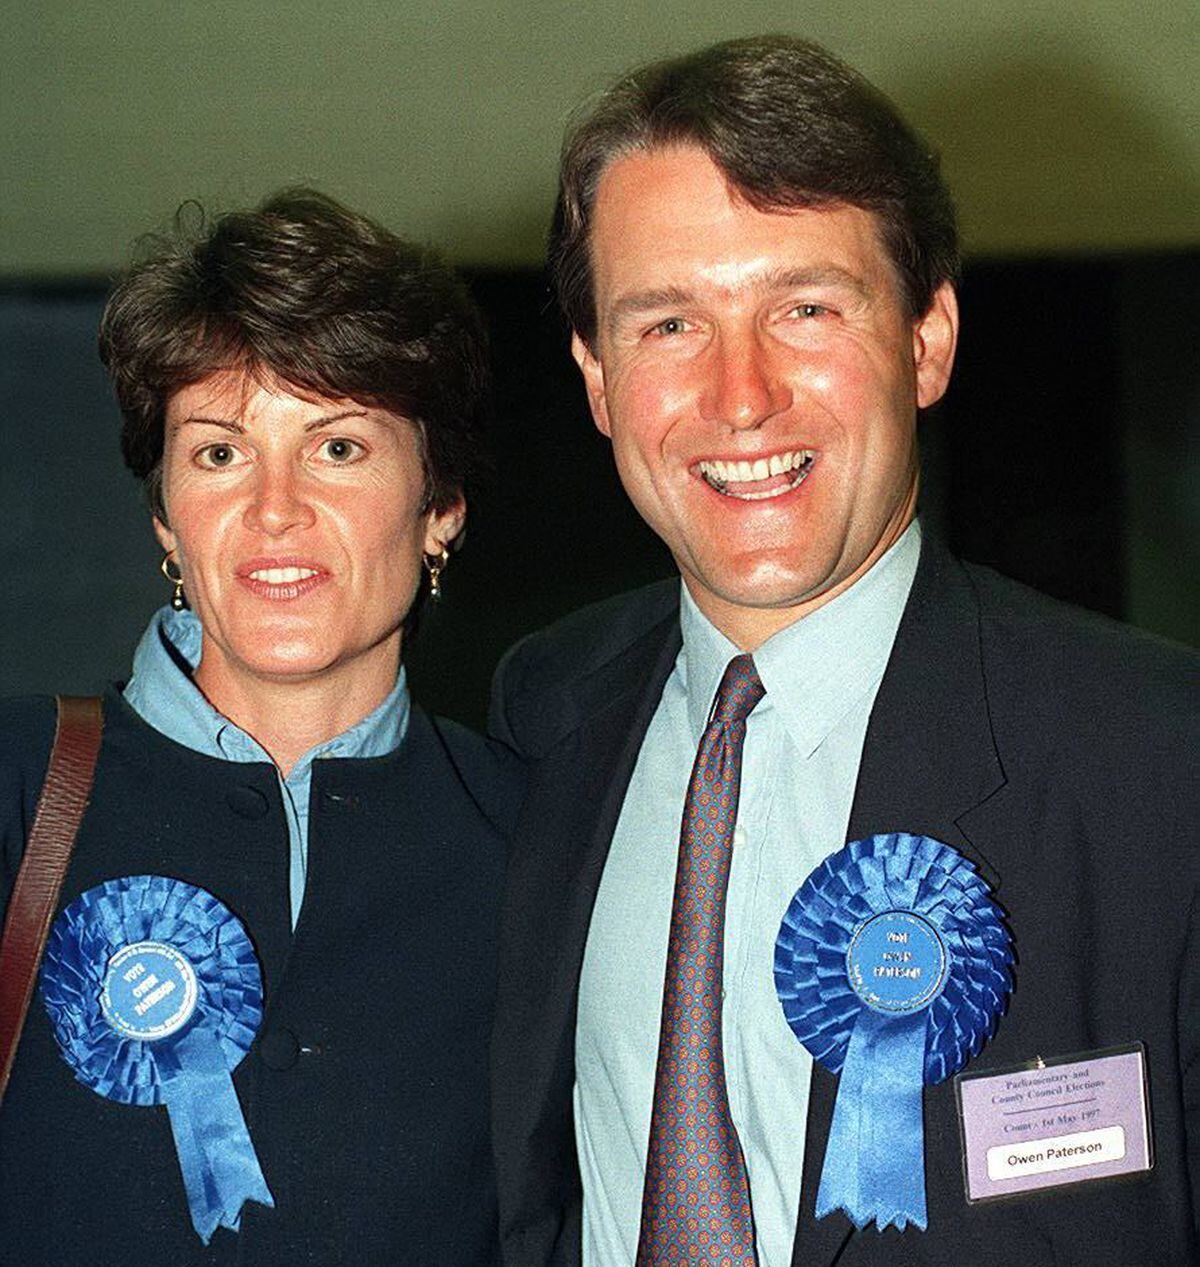 Owen Paterson was first elected in 1997